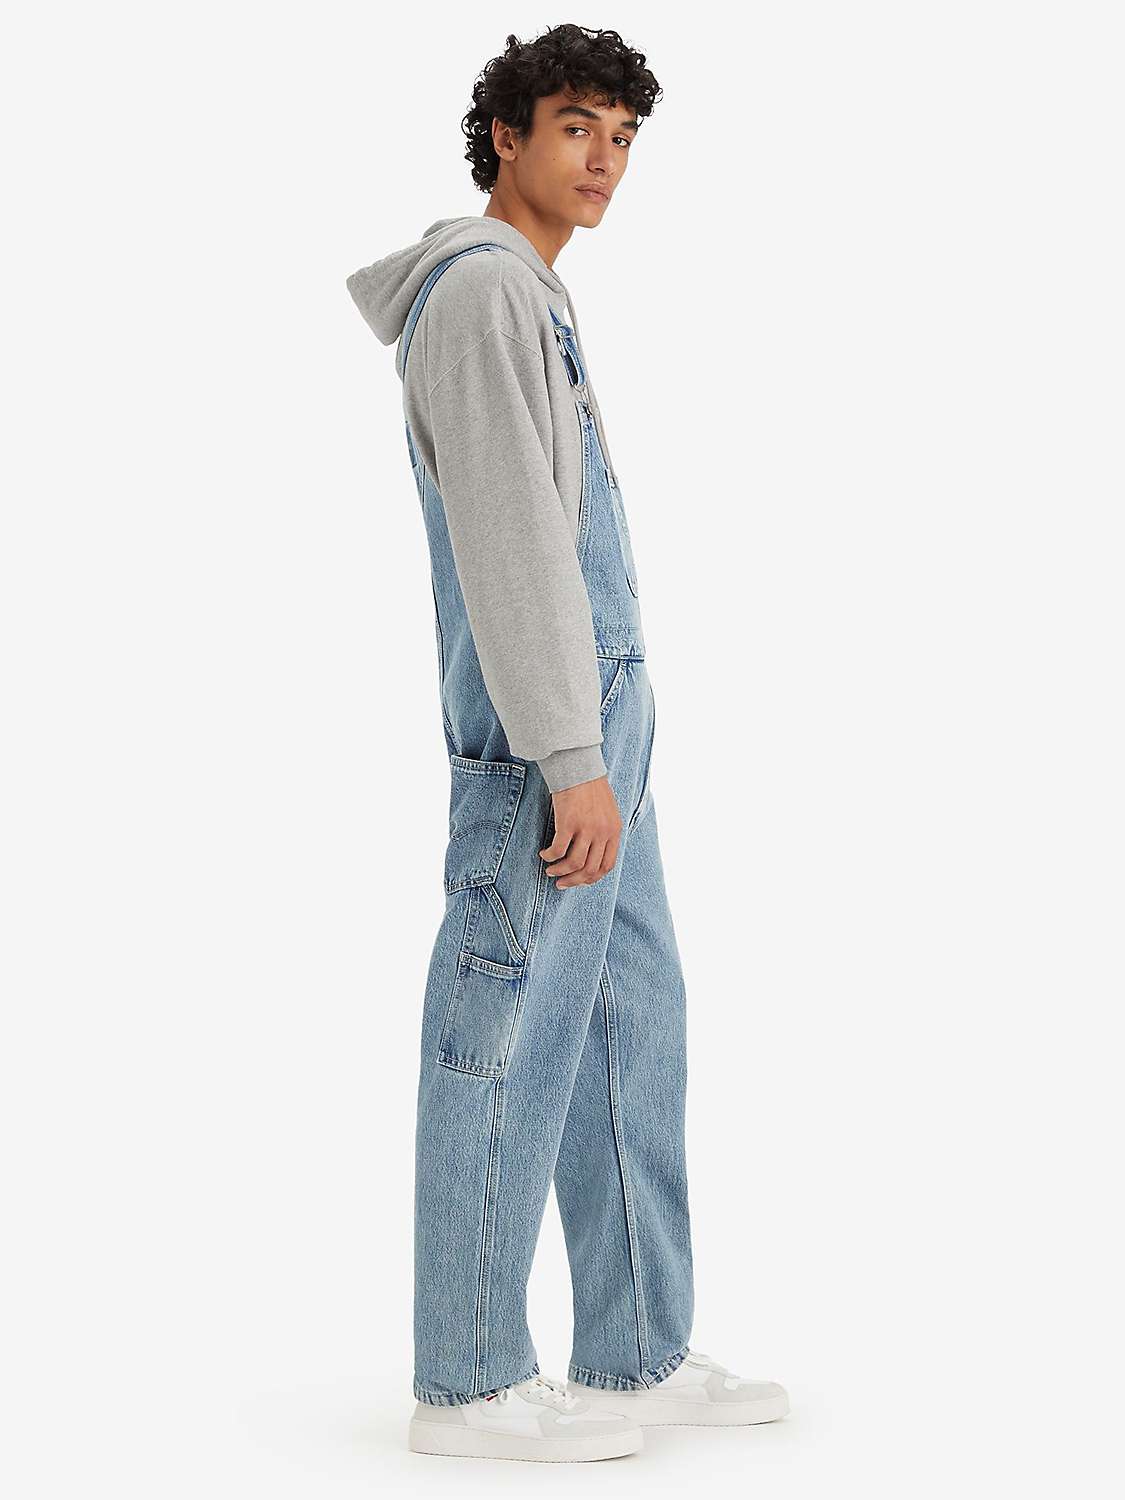 Buy Levi's Red Tab Overalls, Blue Online at johnlewis.com